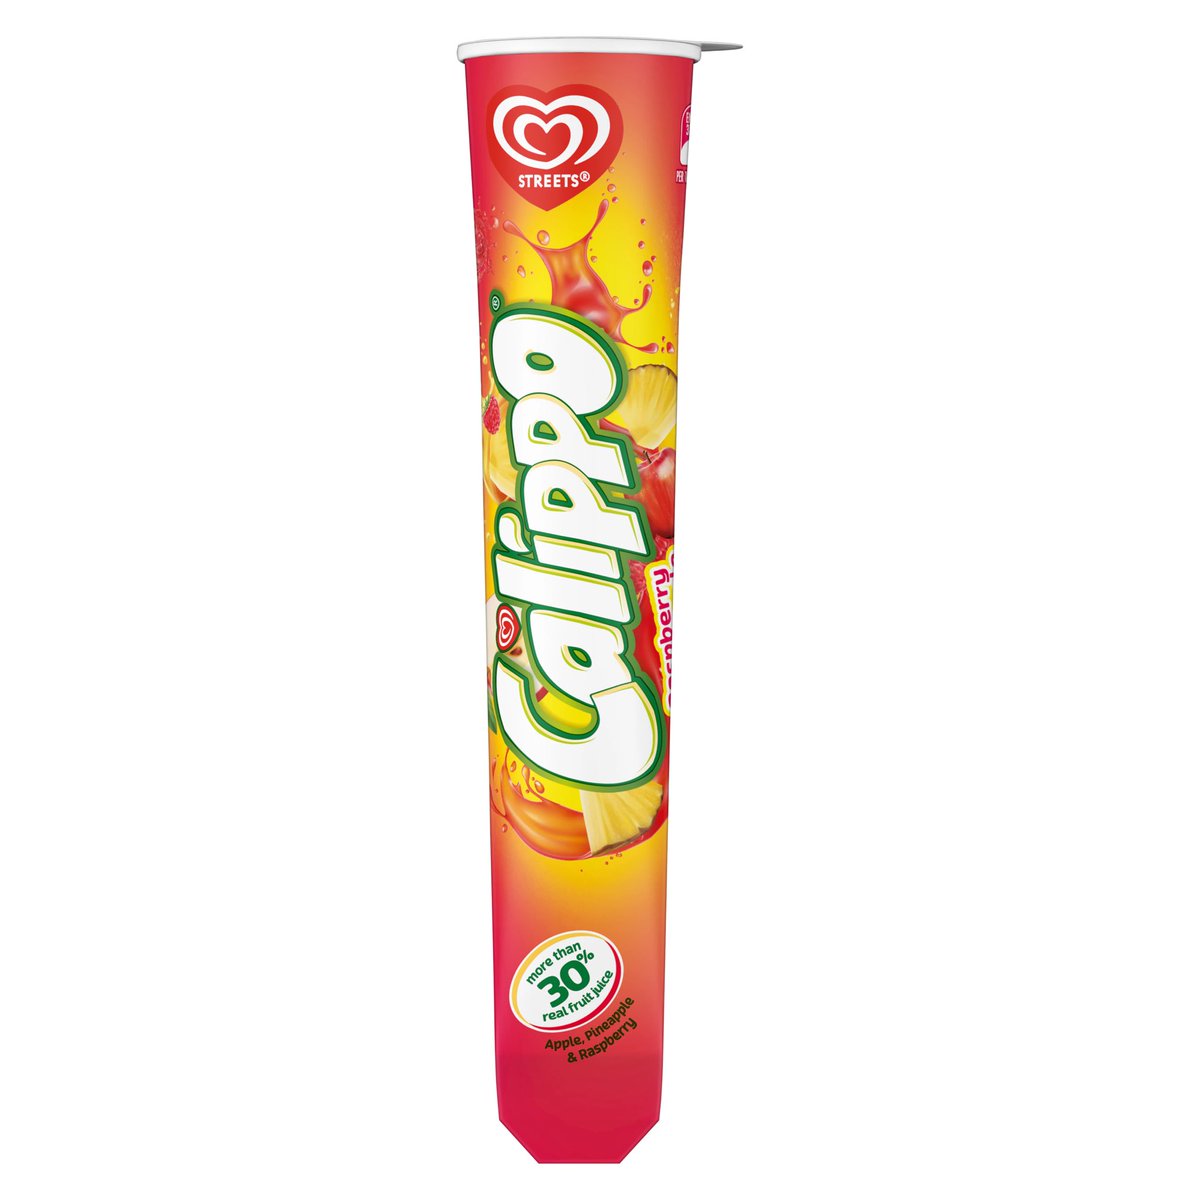 That’s that me Calippo